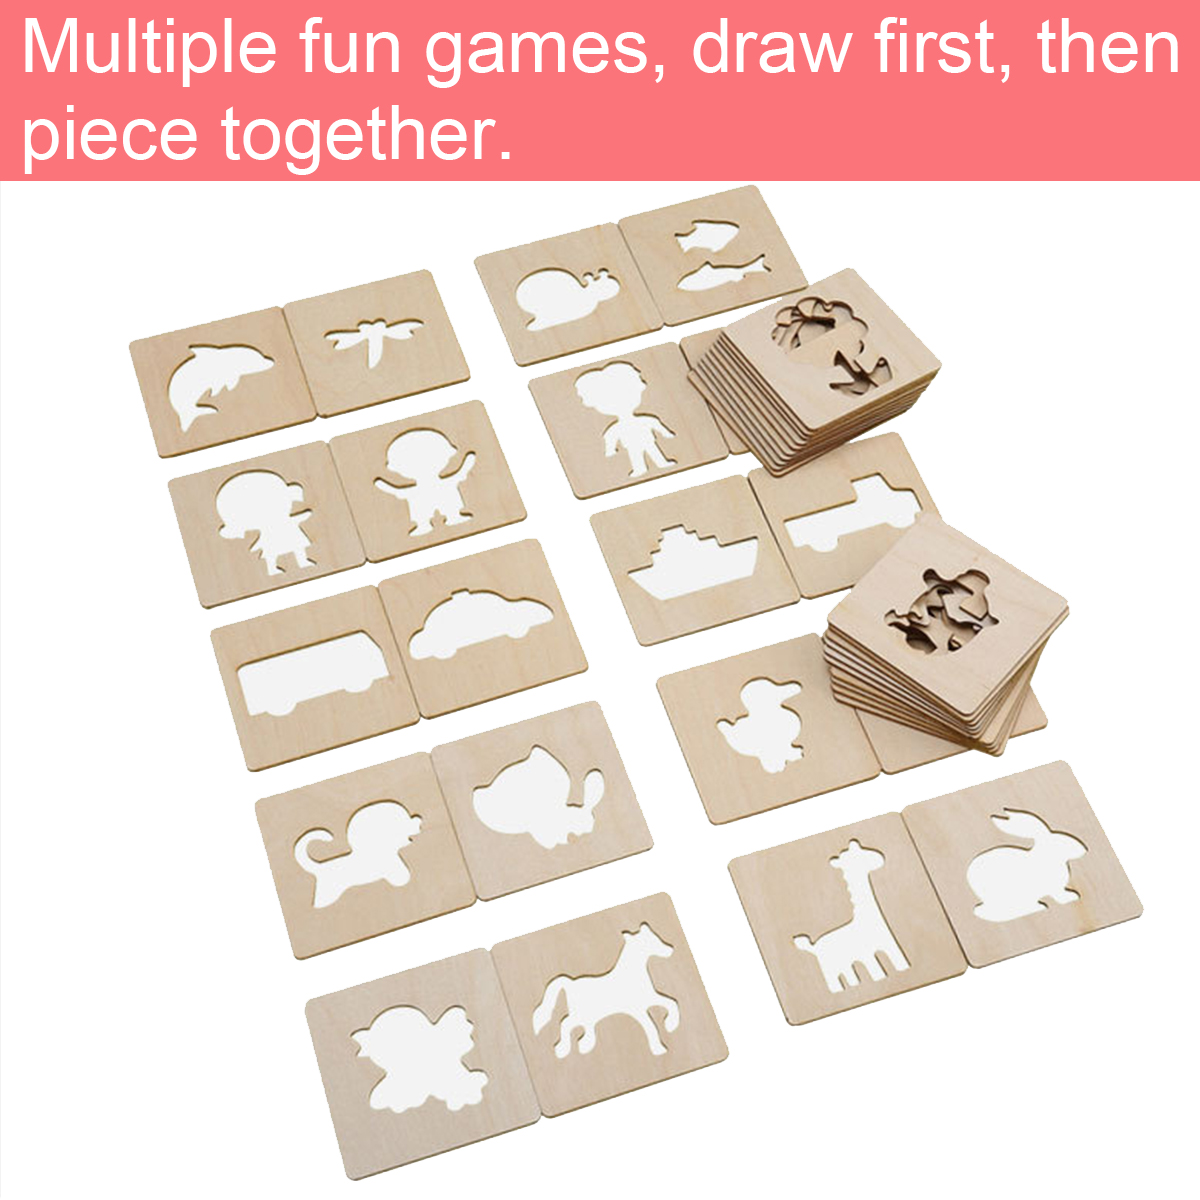 243660x-Color-Painting-Tools-Kit-Painting-Template-Graffiti-Kid-Handmade-Wooden-Toy-1658630-7